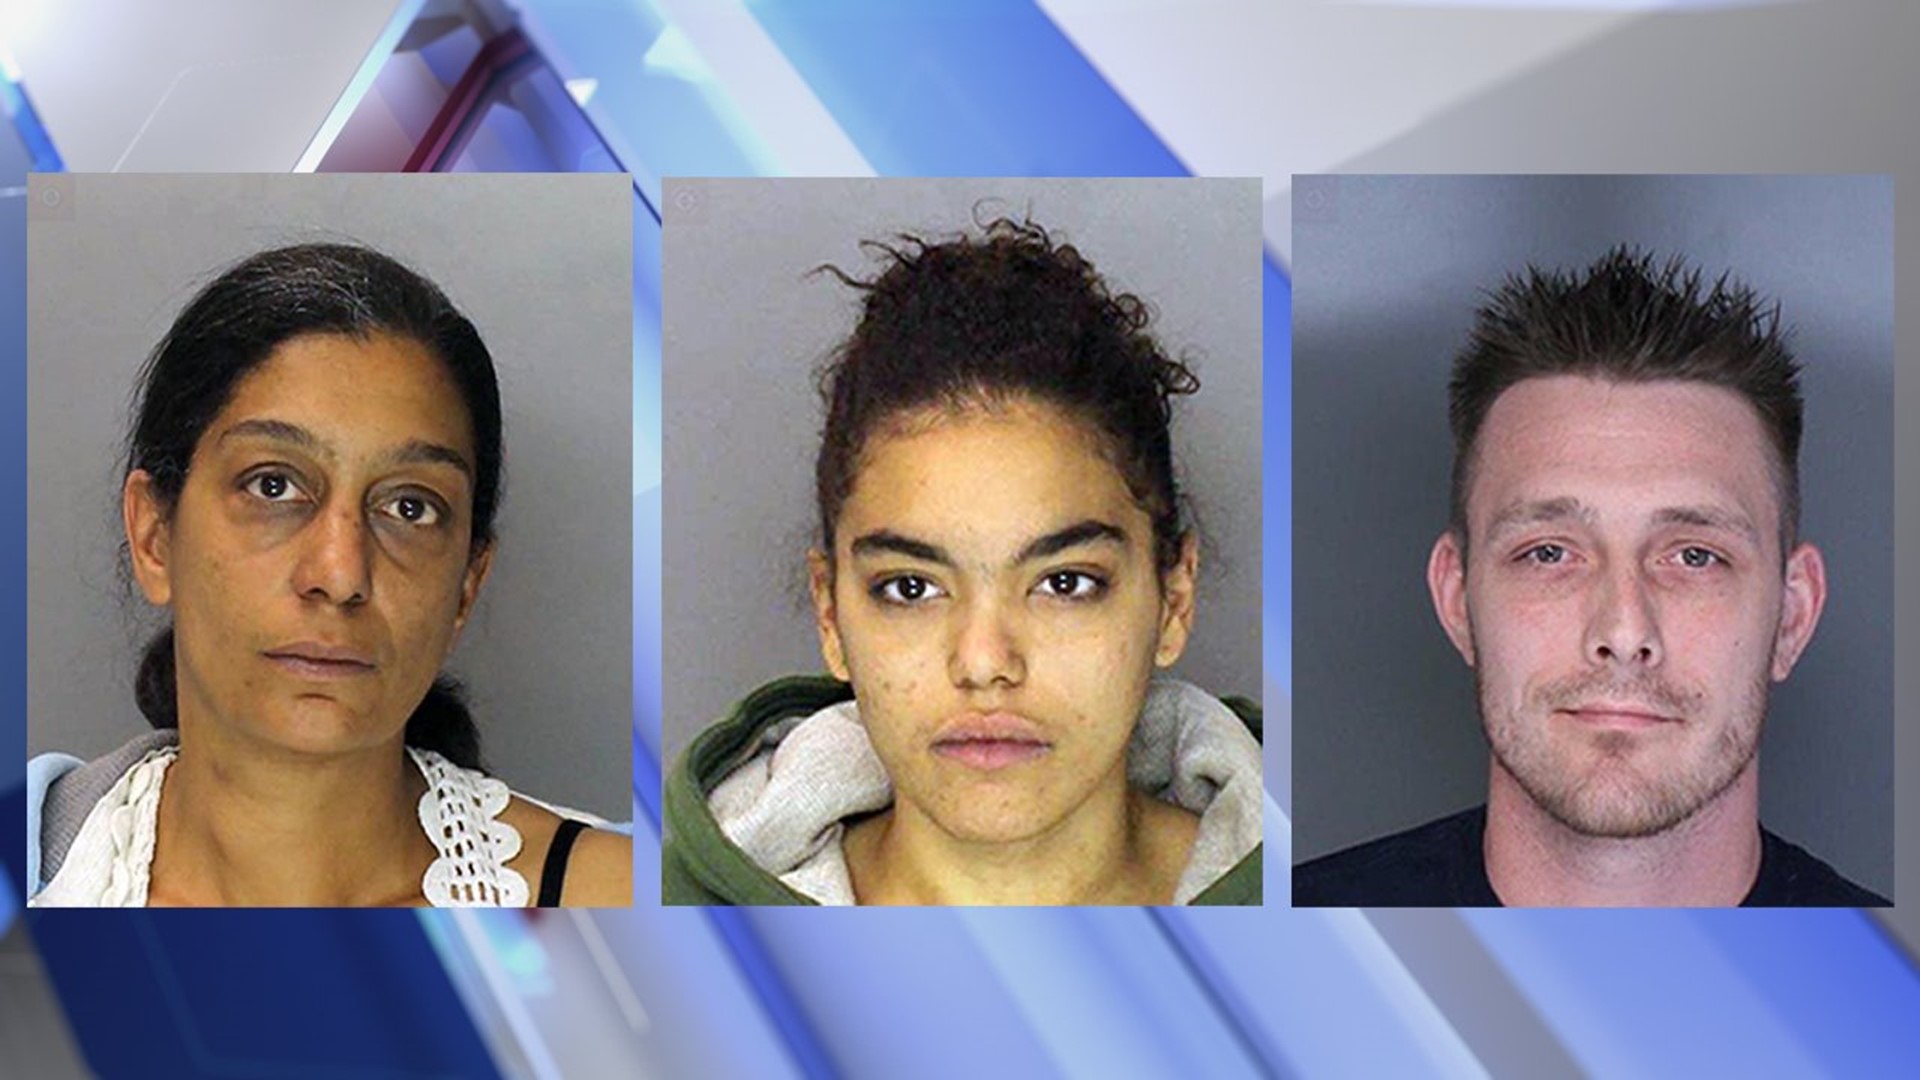 Police Raid Steelton Home Three Arrested On Drug Weapon Charges 